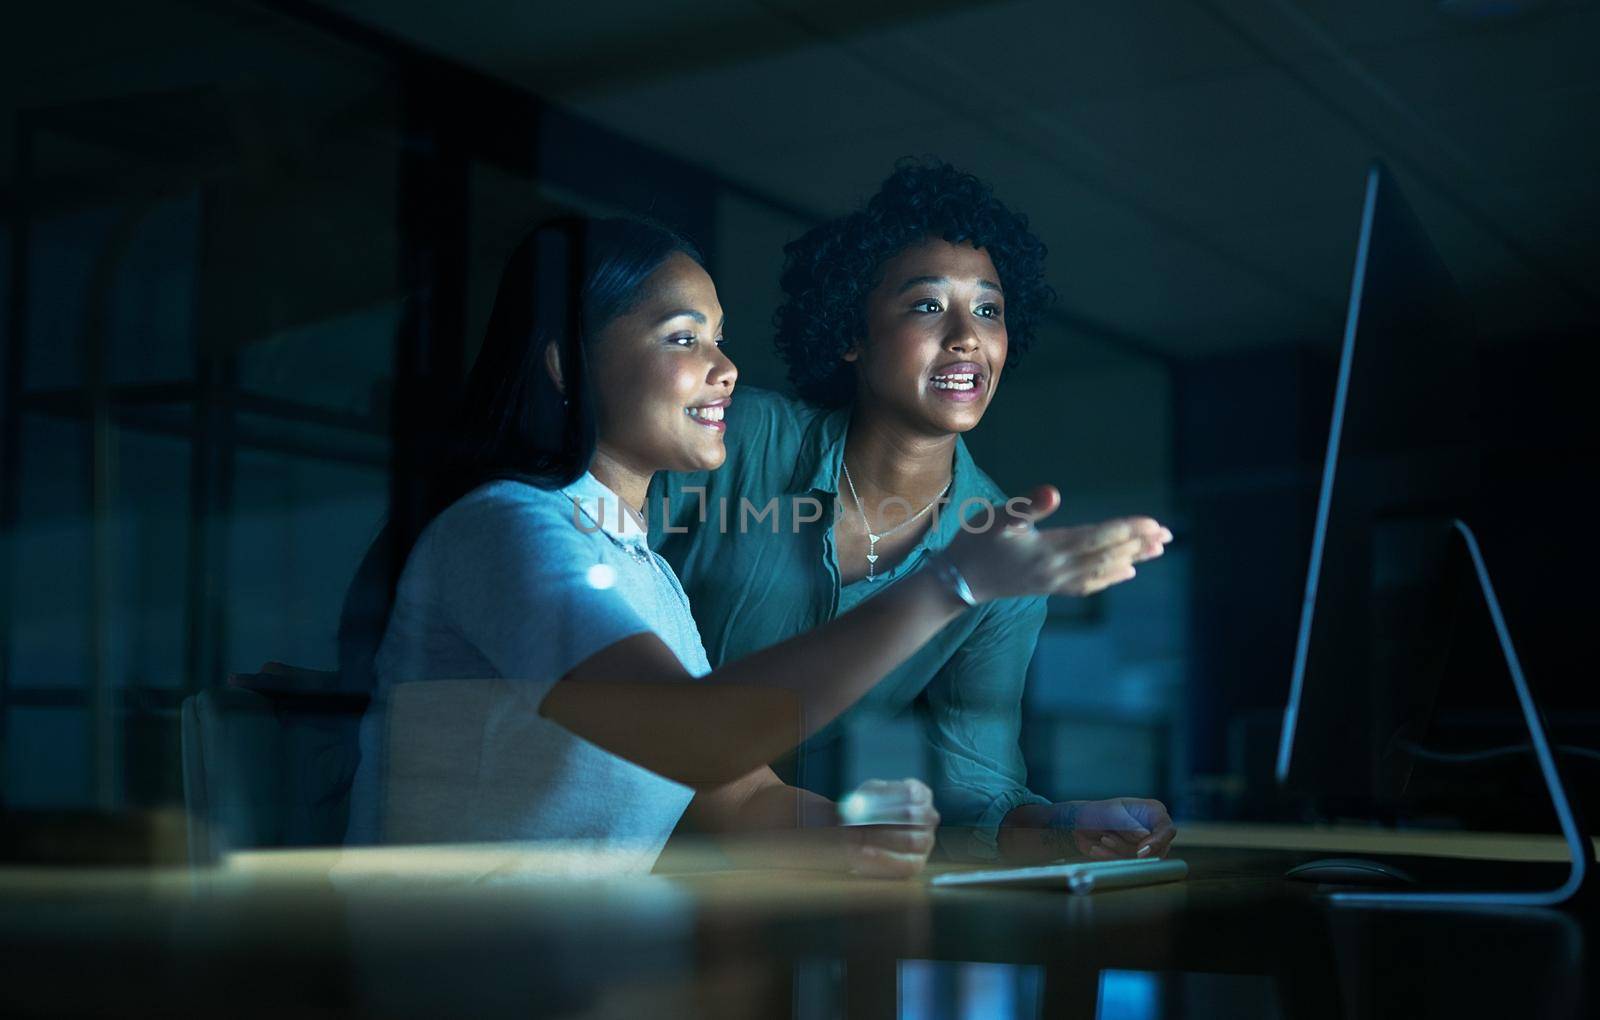 Good communication gets good results. two young businesswomen using a computer together during a late night at work